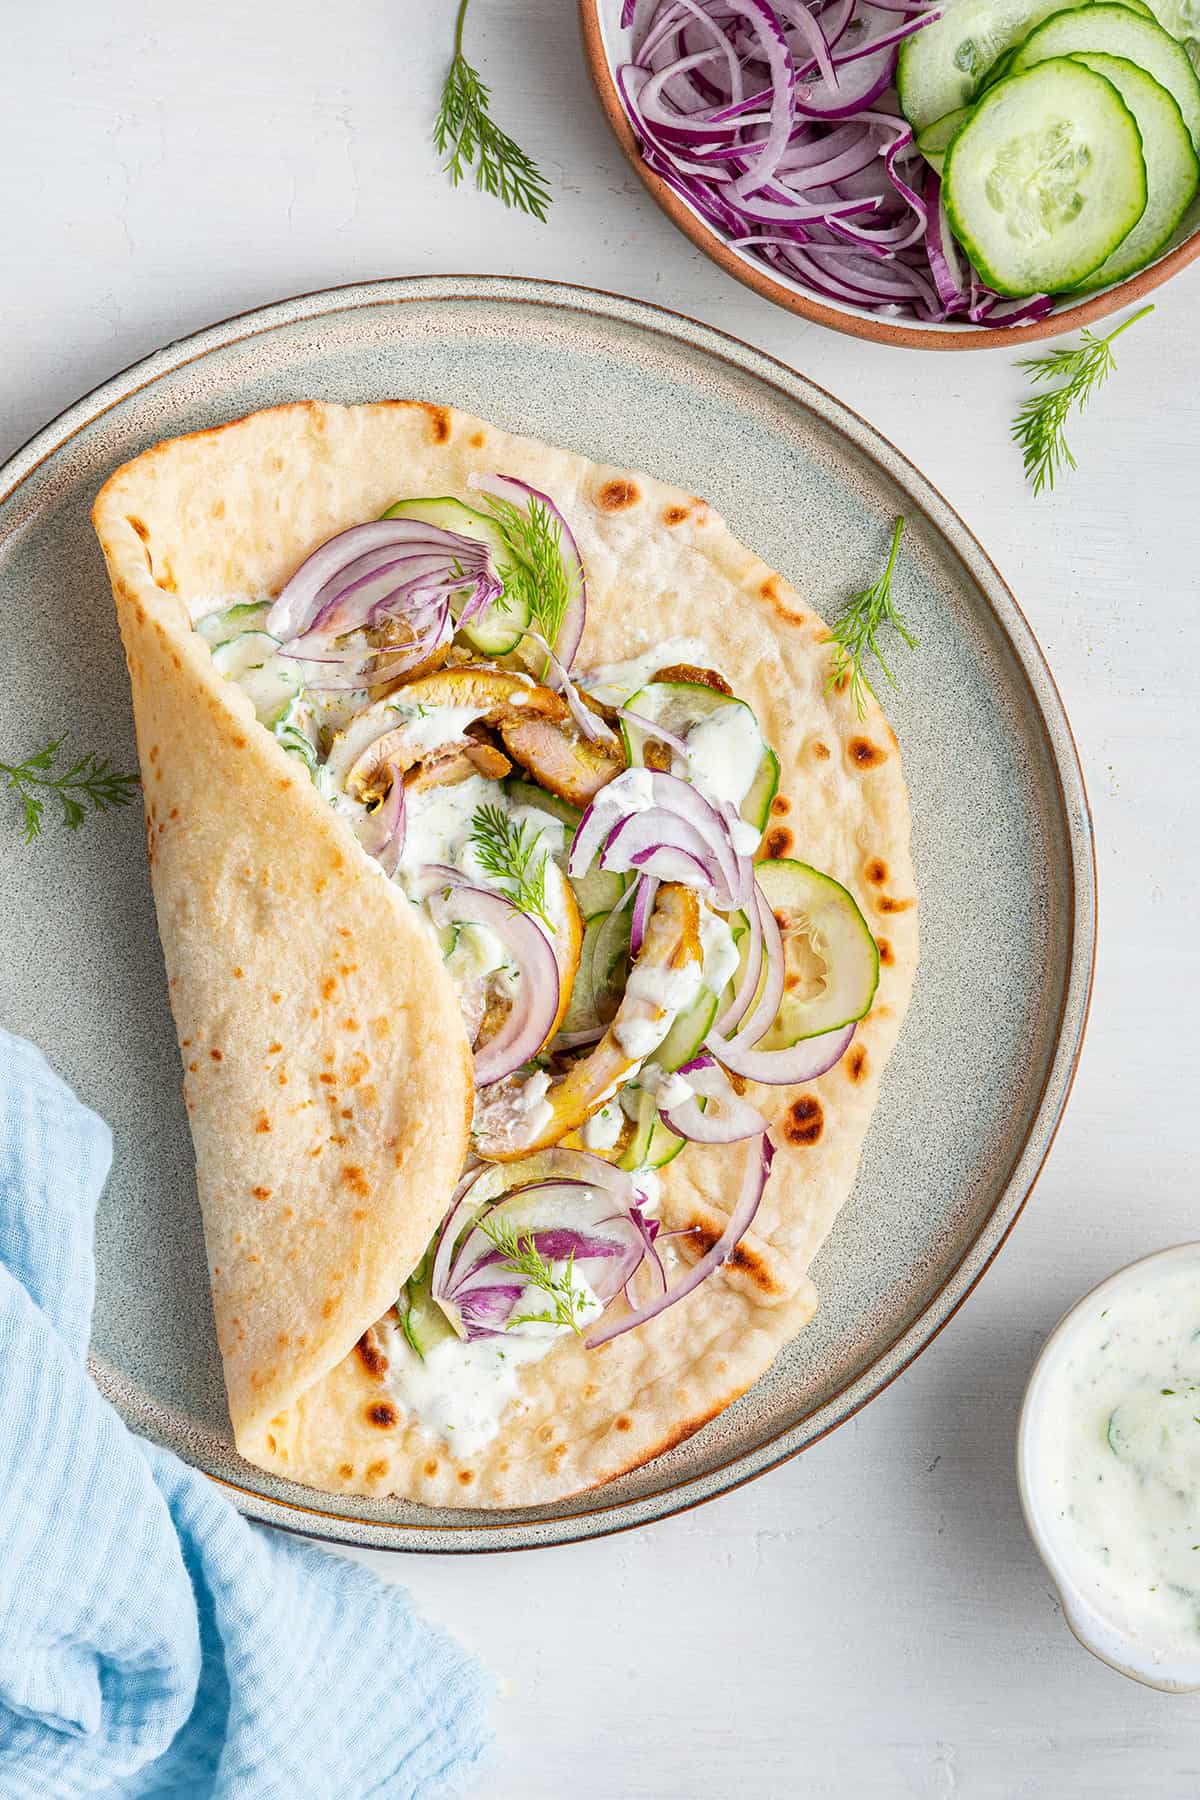 Overhead view of chicken shawarma gyro on plate, with one end folded